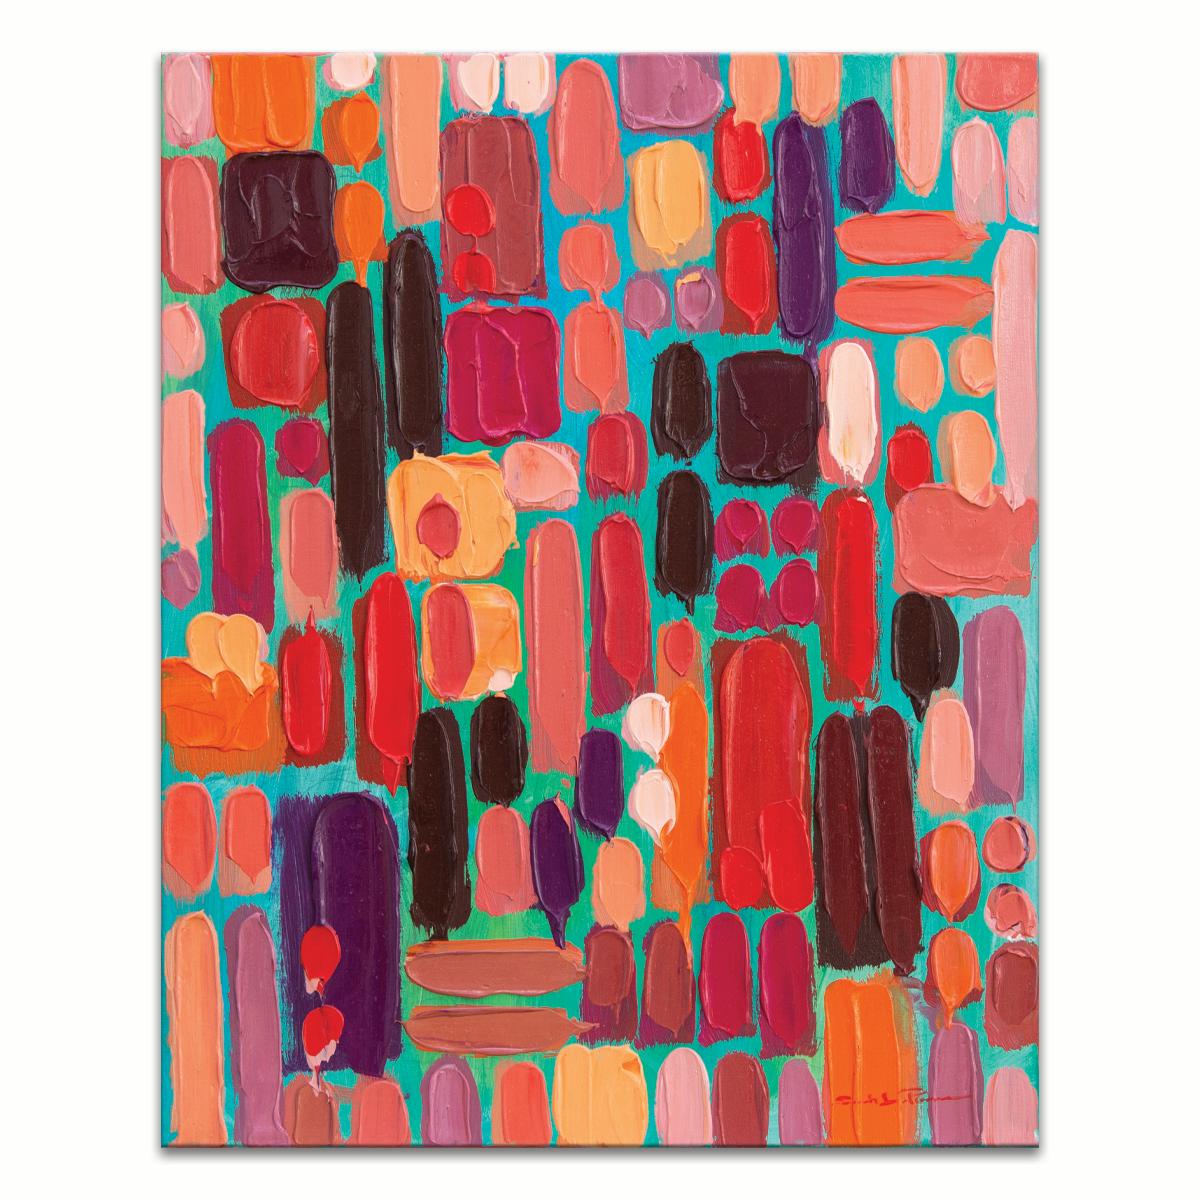 ‘Jewels' Wrapped Canvas Original Painting features a vibrant tropical abstract in vibrant tones of blush, coral, orange, fuchsia, purple, red, and brown. Inspired by the beauty surrounding her in tropical Florida, Sarah LaPierre utilizes her